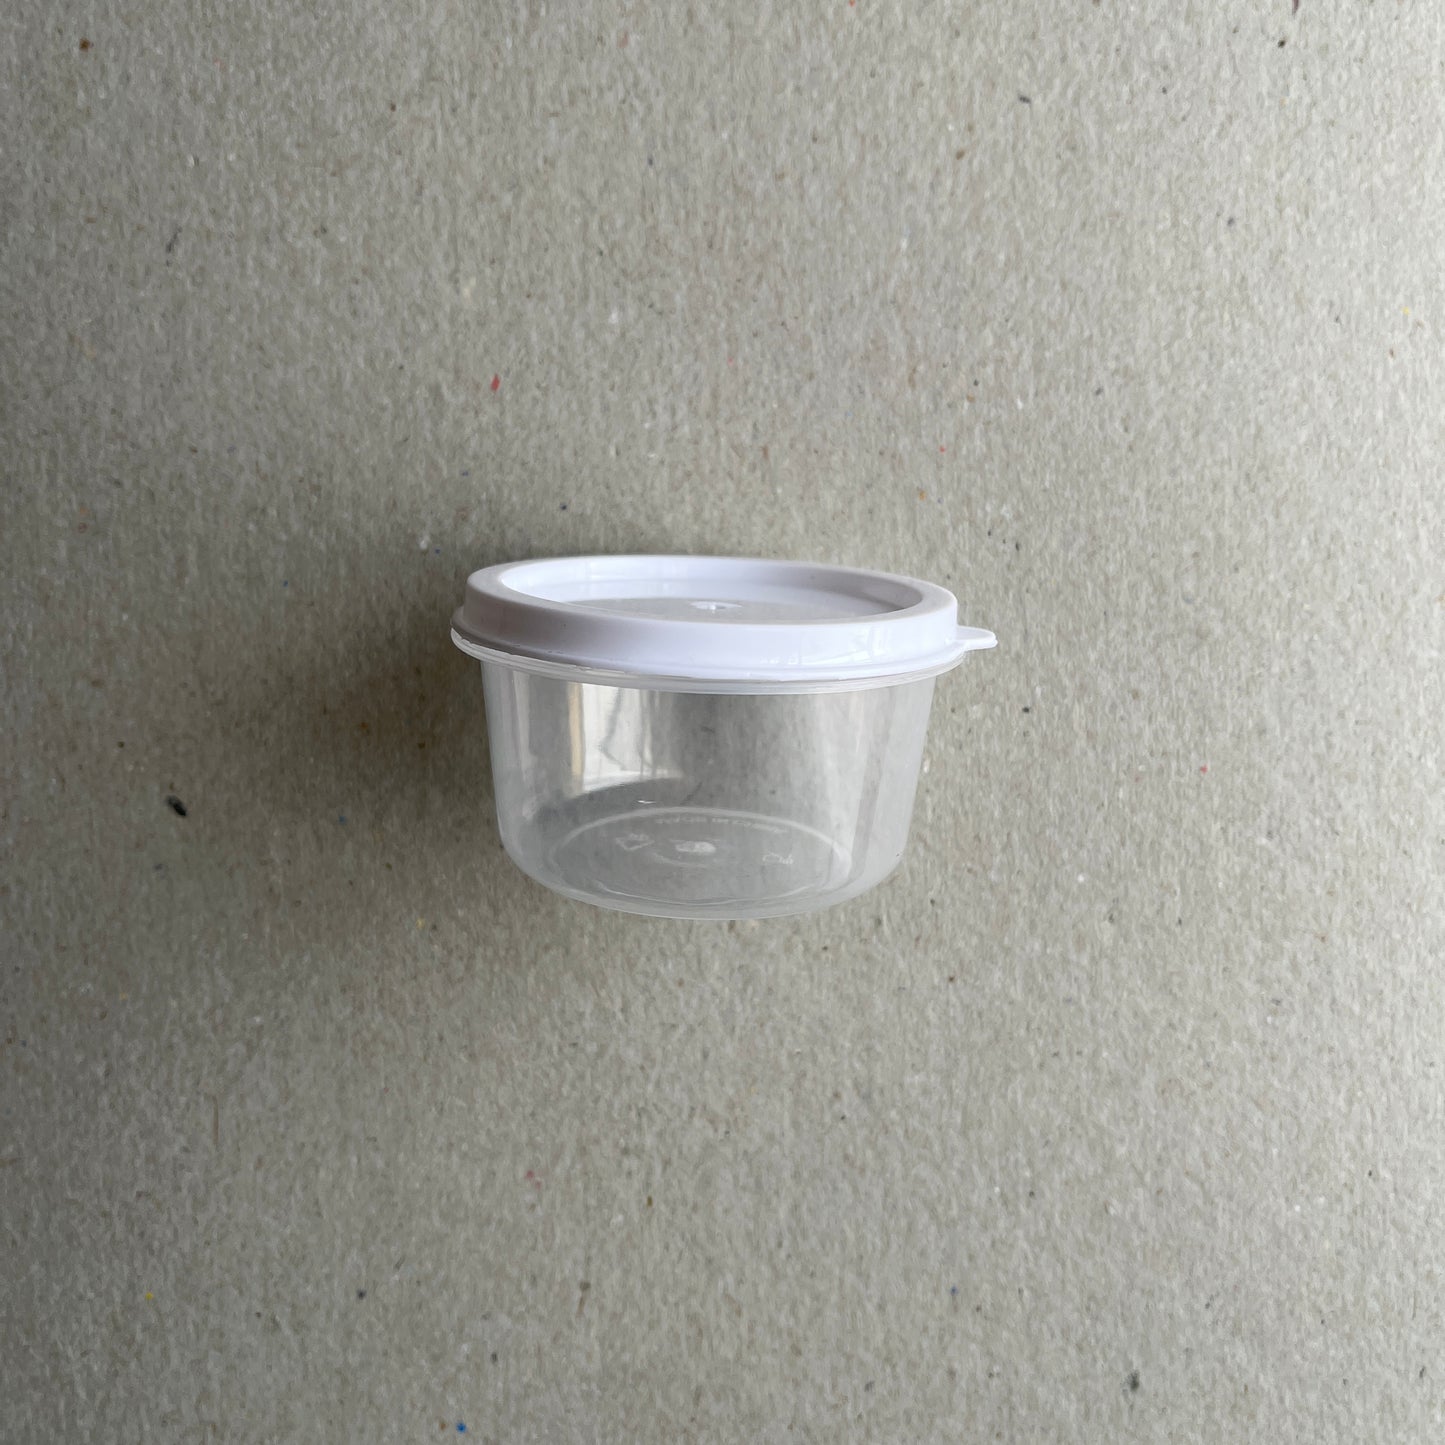 Plastic coffee dosing cup dosing pot white lid 58mm